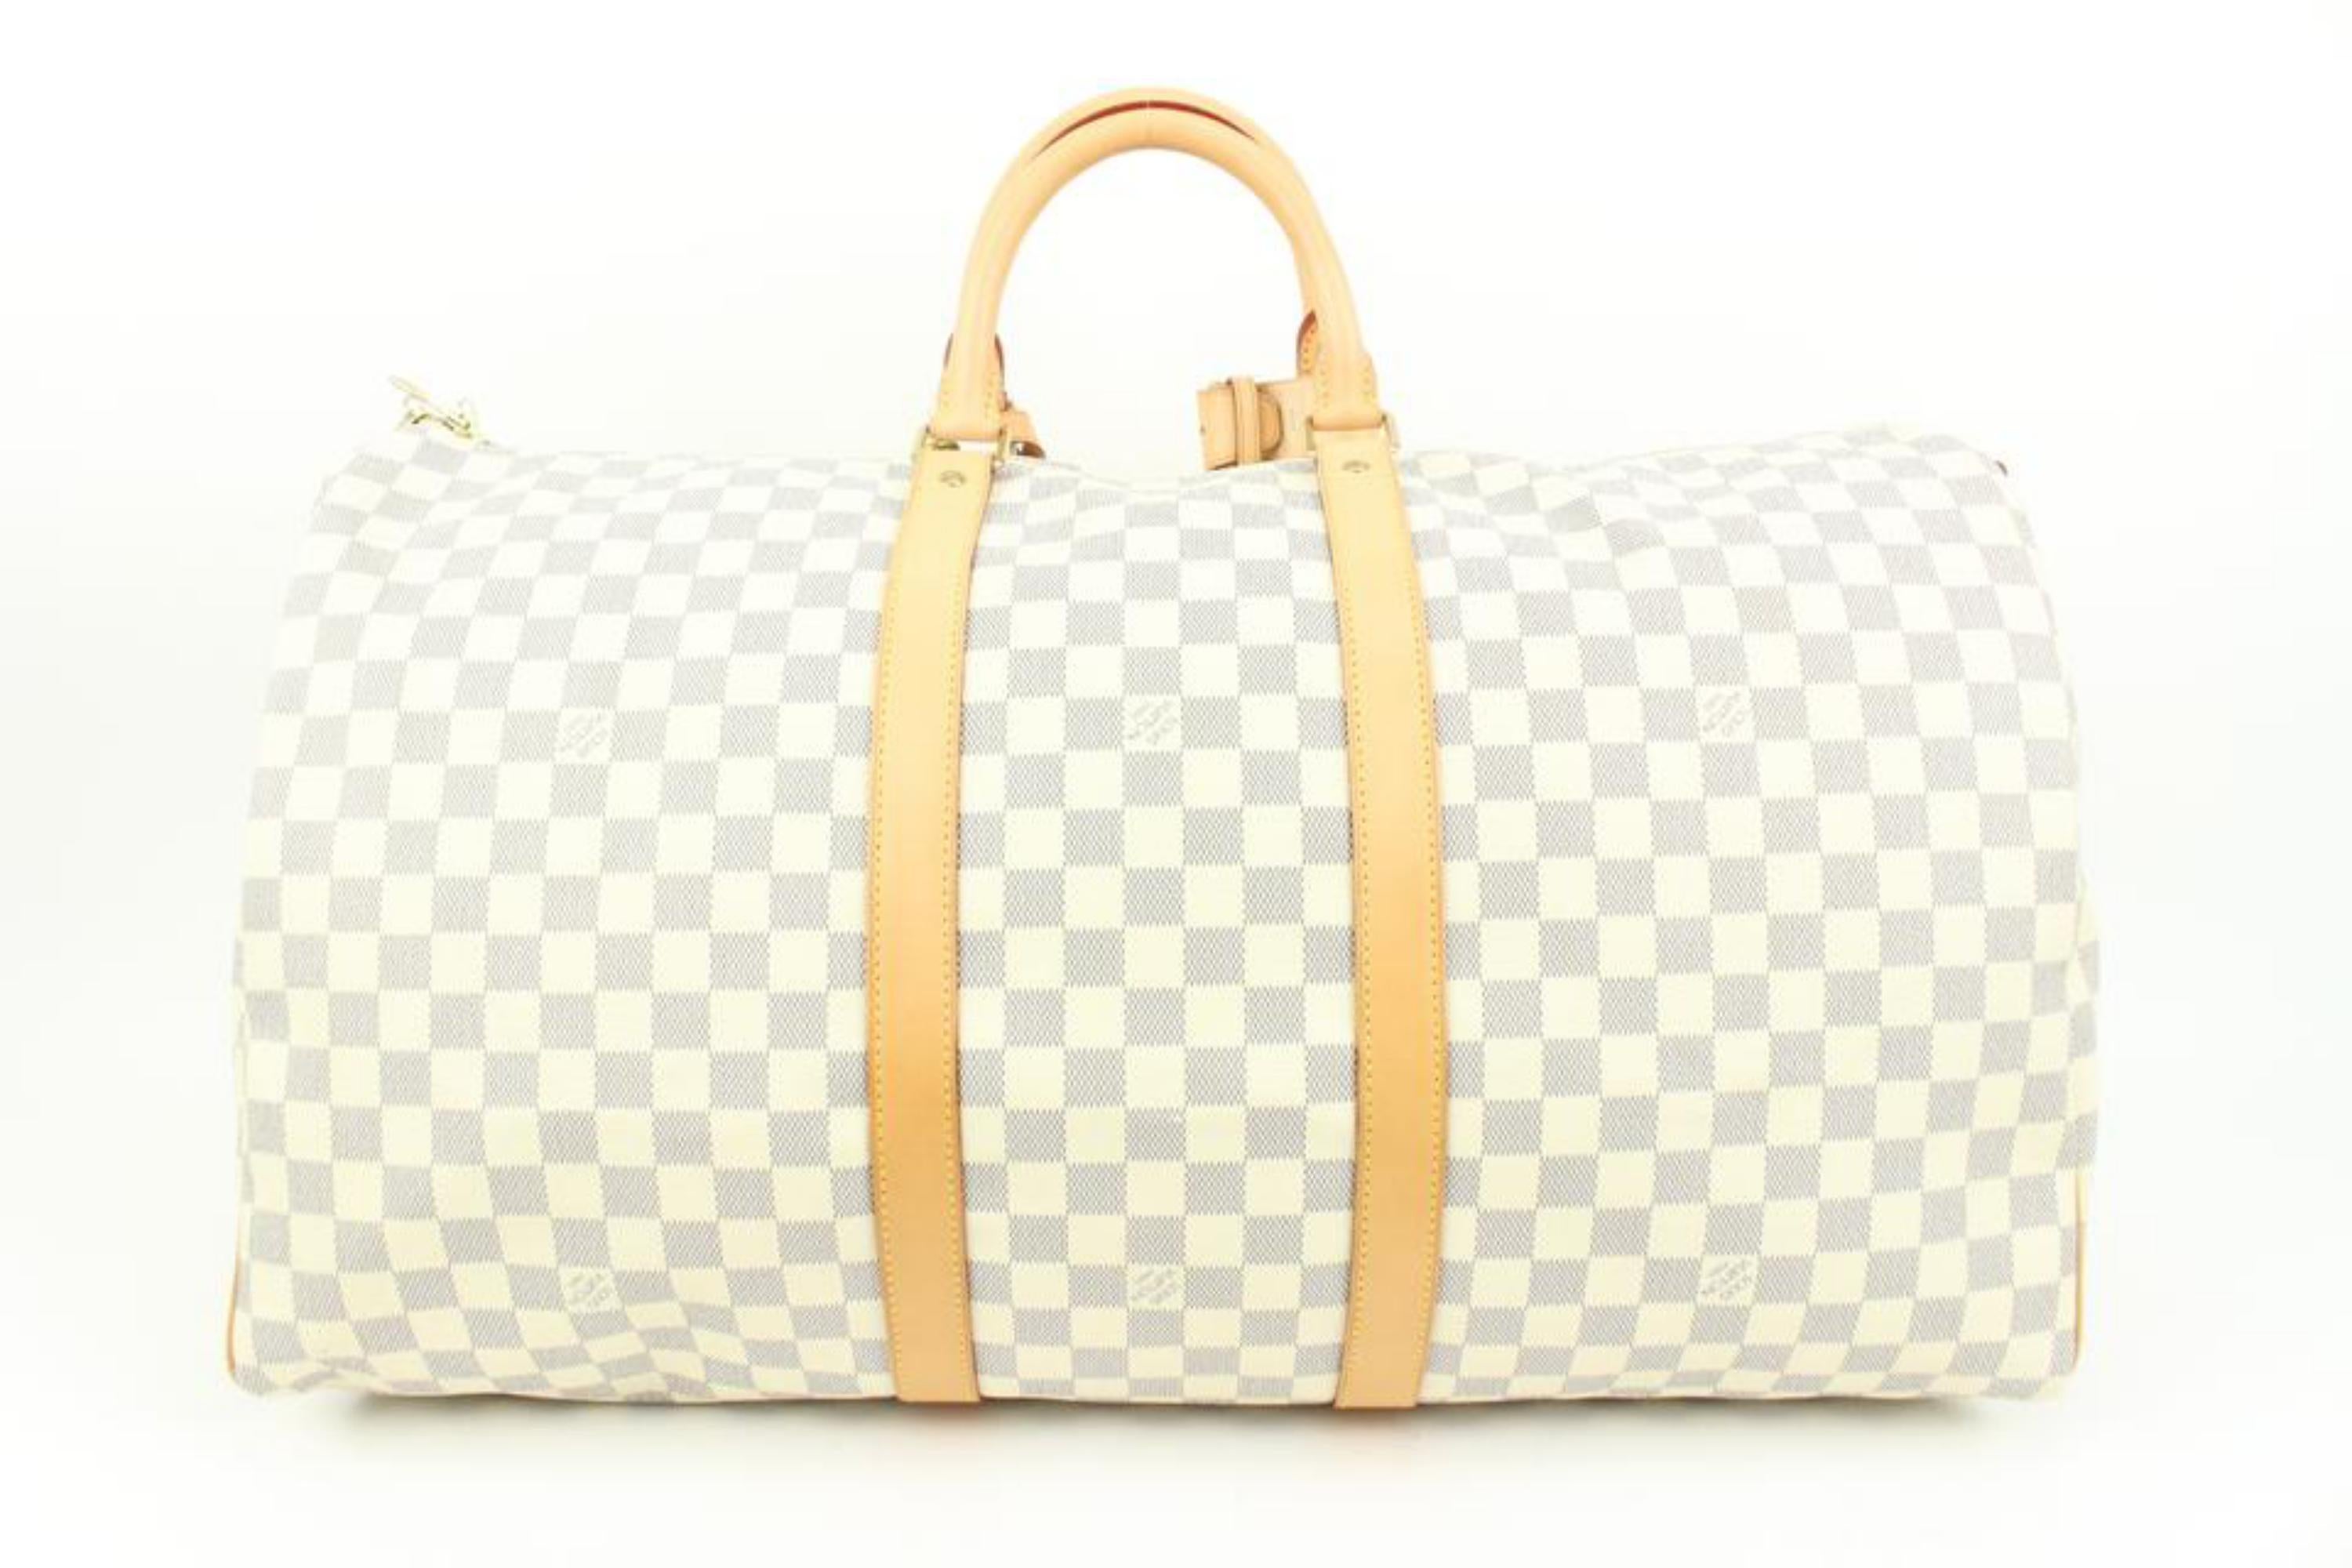 Louis Vuitton Damier Azur Keepall Bandouliere 55 Duffle with Strap 44lk96 In Excellent Condition For Sale In Dix hills, NY